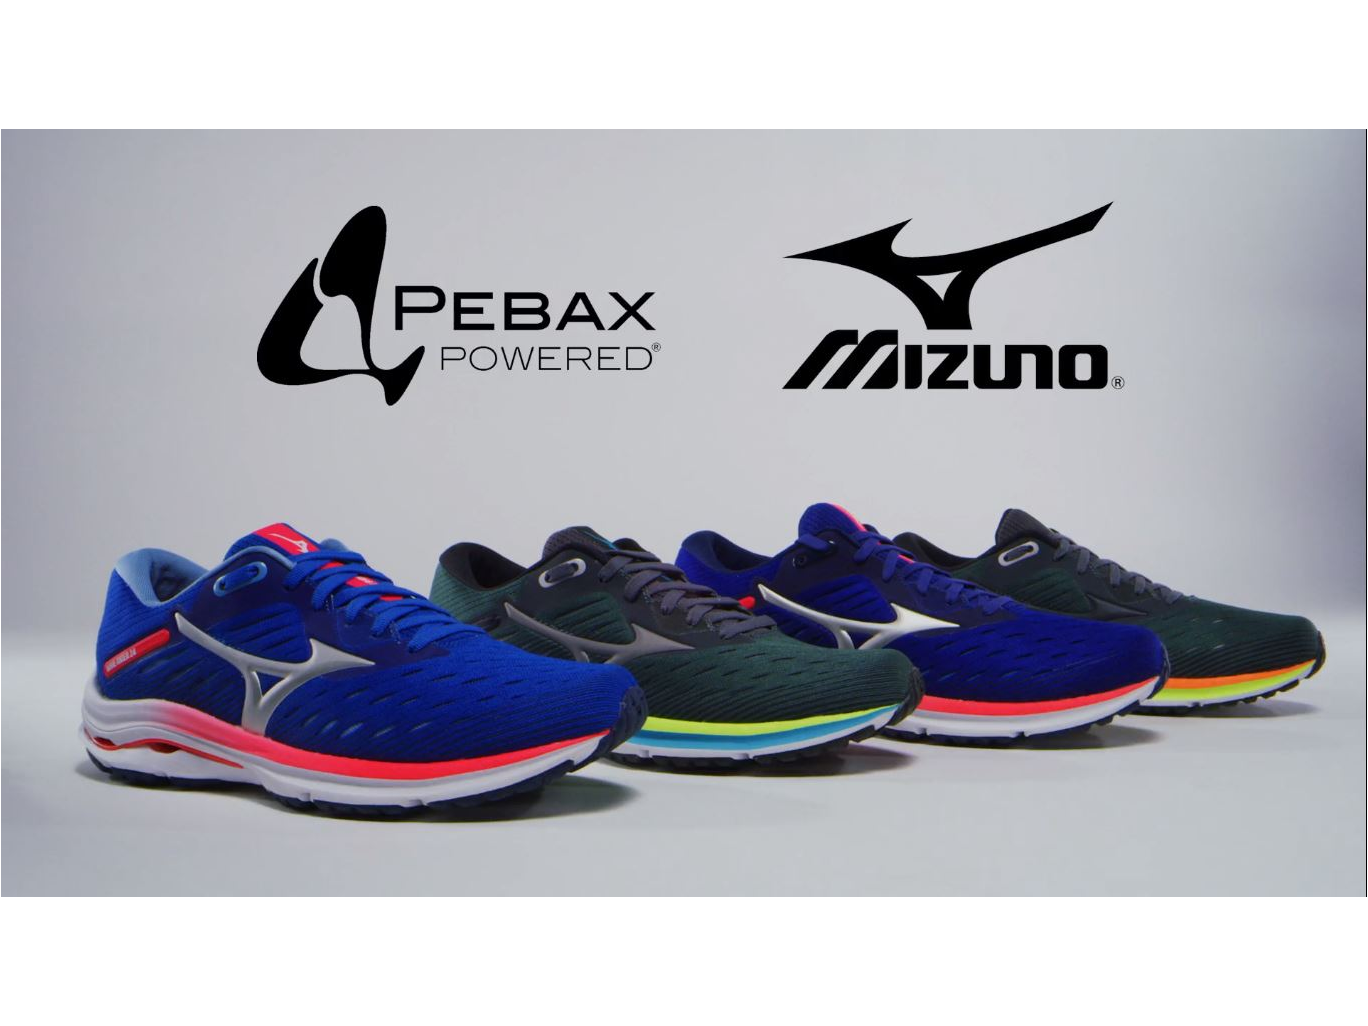 Mizuno launches the new Wave Rider 24 with a bio-based Pebax Rnew wave plate